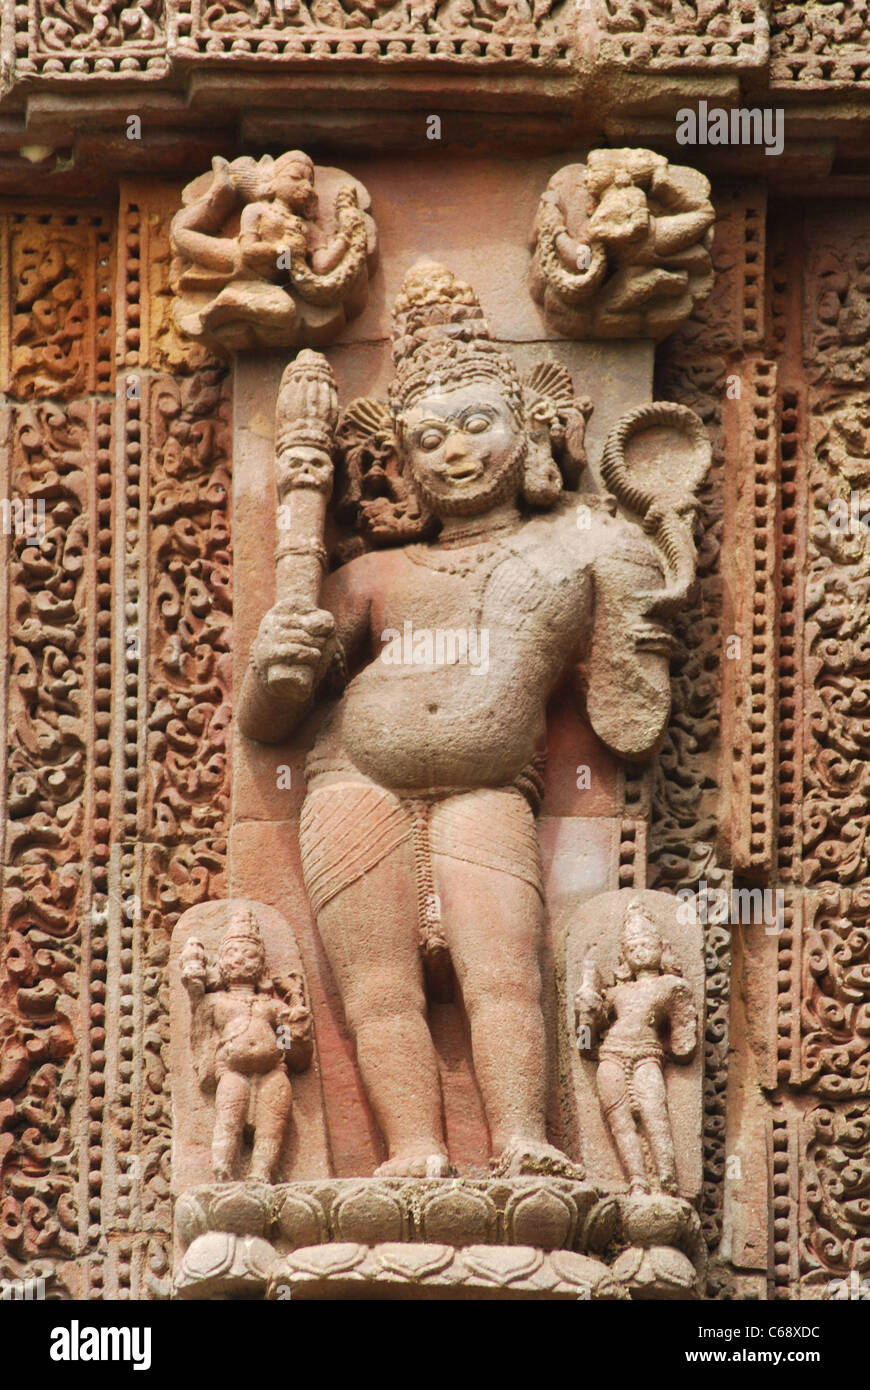 Close up of a sculpture on Raja Rani Temple Stock Photo hq nude picture